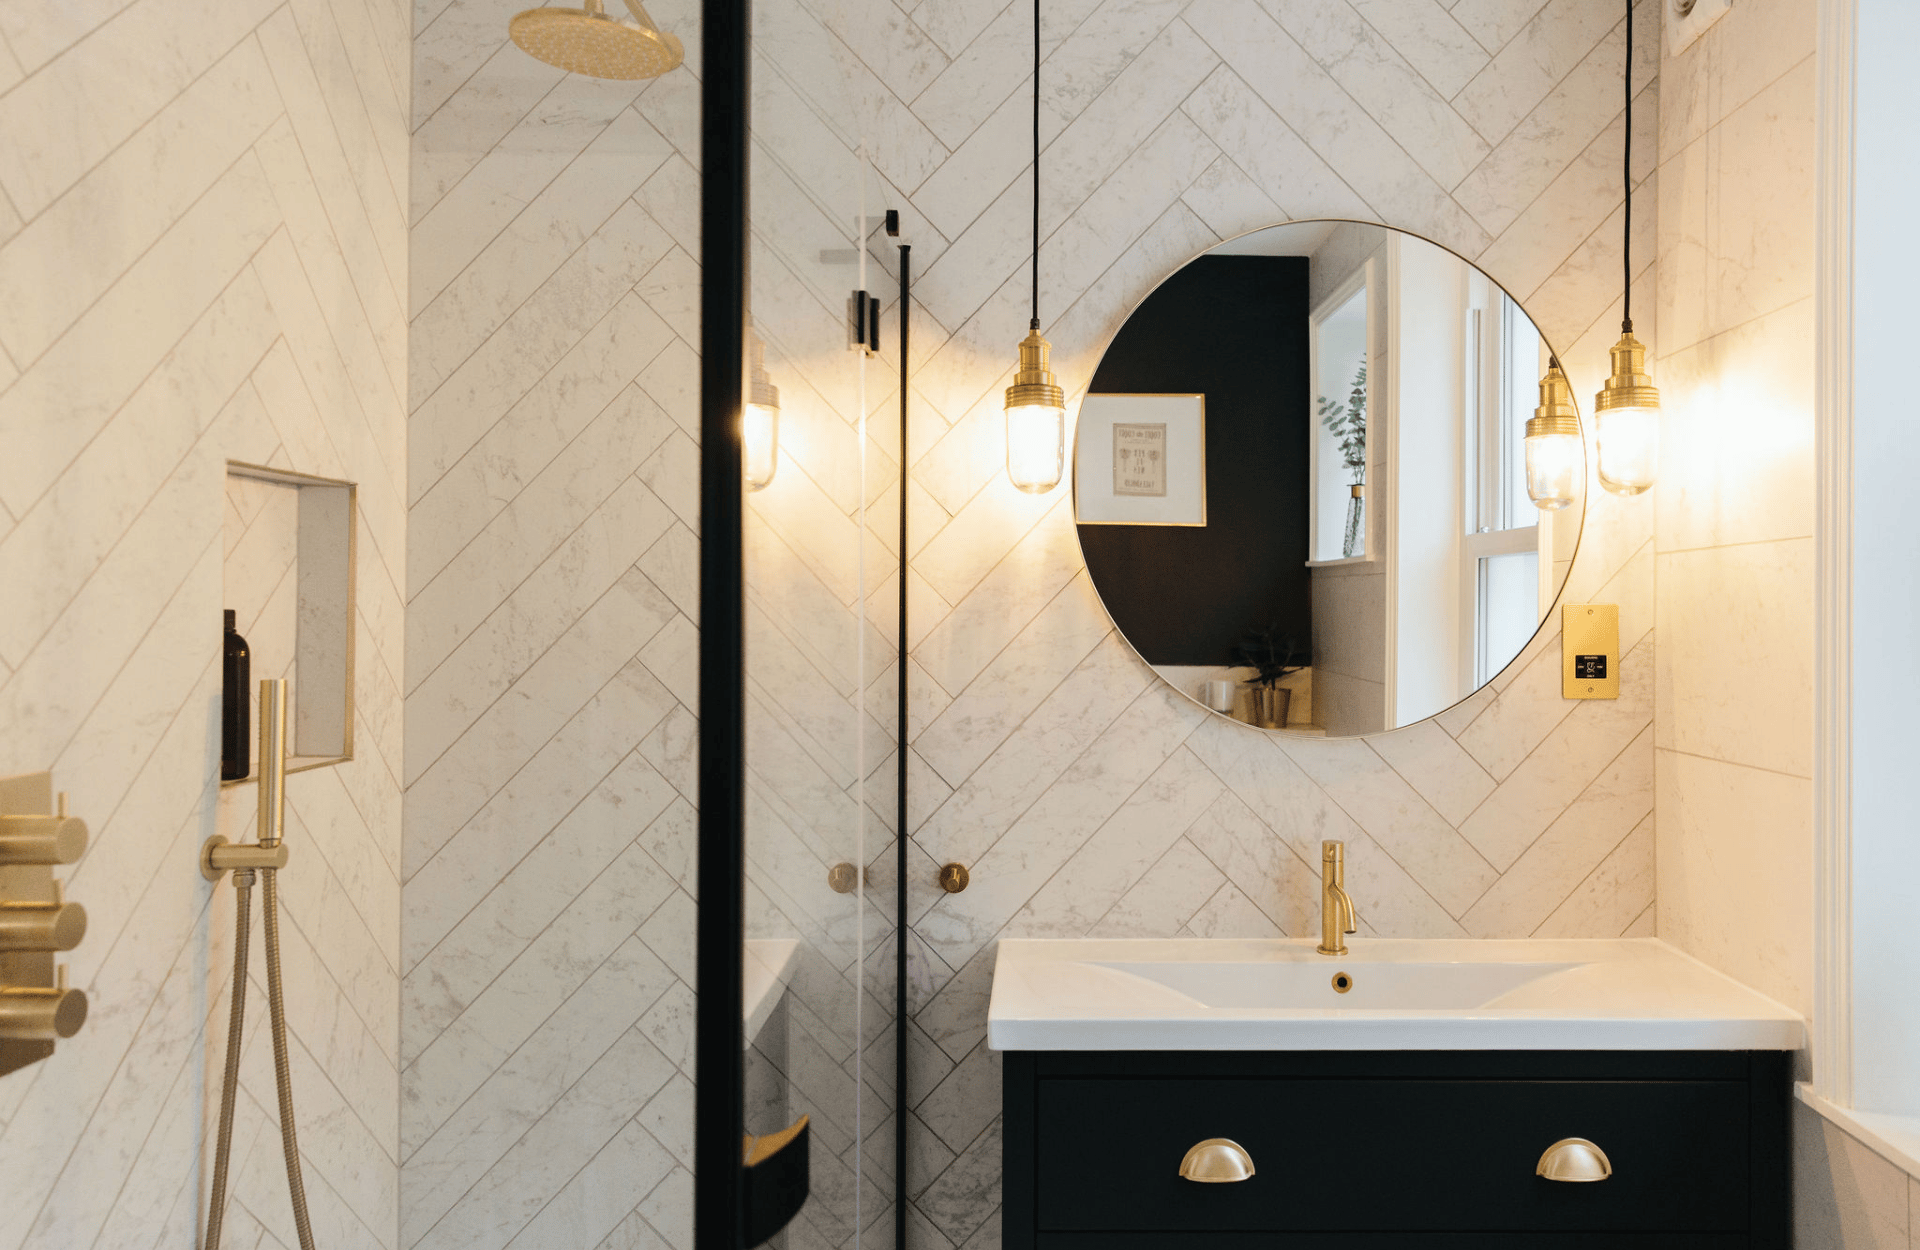 Monochrome bathroom with gold details and pendant lights